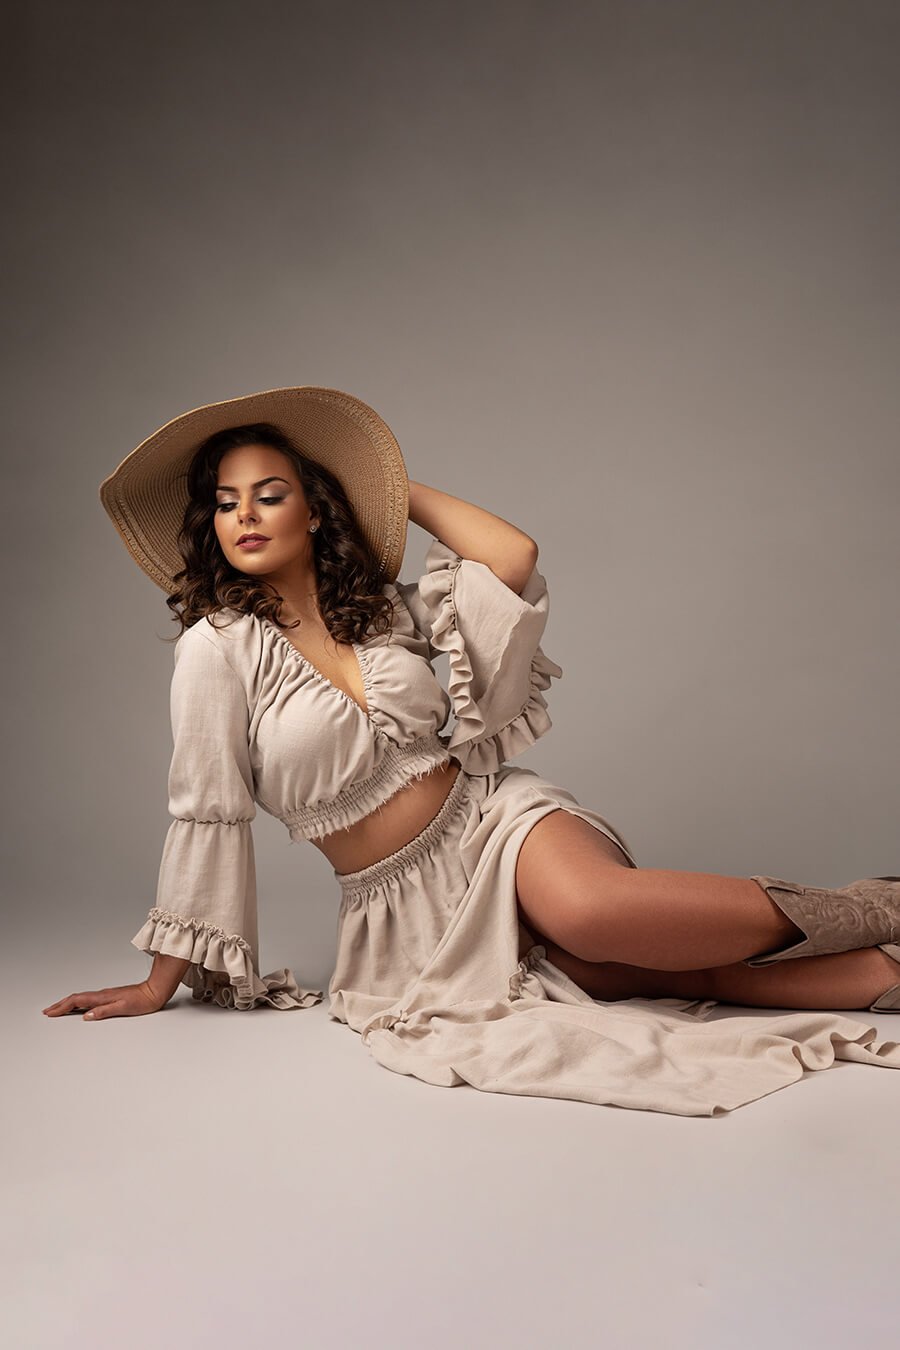 brunette model poses in a studio for a boho western chic photoshoot. she wears a ecru color set with a lot of ruffles on the top and the skirt. she wears boots to match the style. the model is sitting on the floor and leans the body on 1 arm. the other holds her hear, where she has a brown hat to match the style.